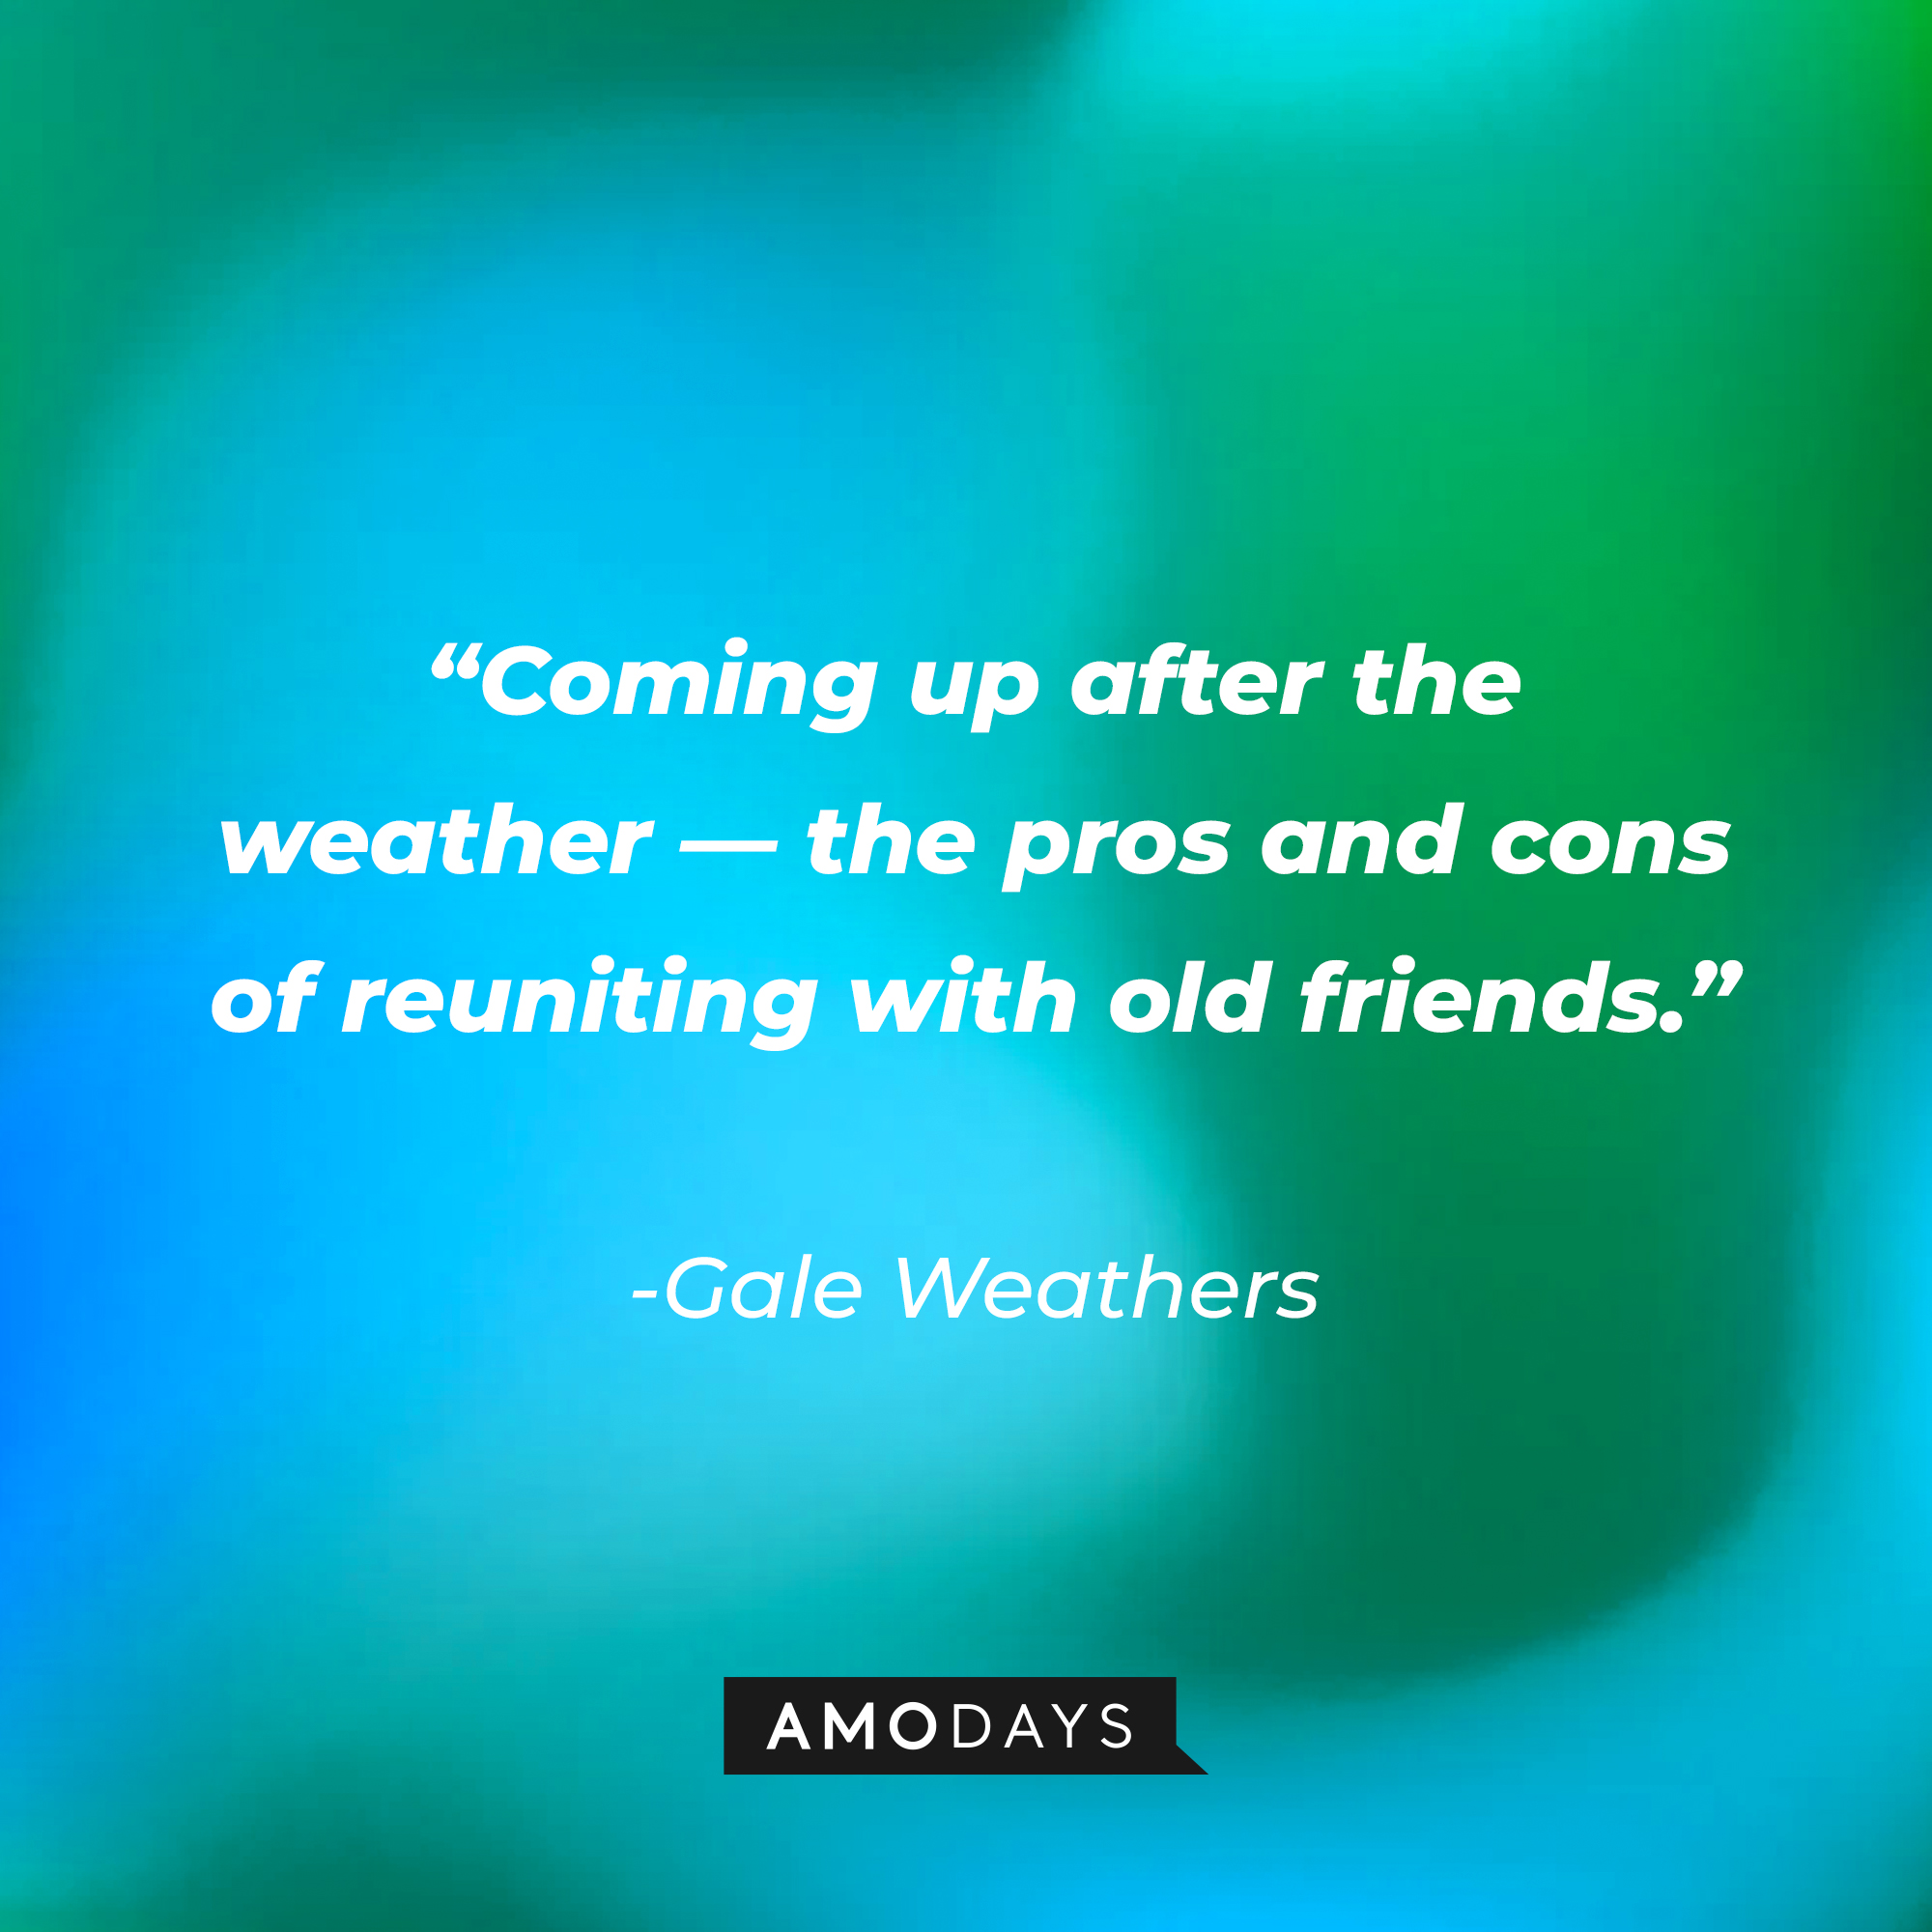 Gale Weather’s quote from “Scream ‘(2020)’”: “Coming up after the weather- the pros and cons of reuniting with old friends.” | Source: AmoDays